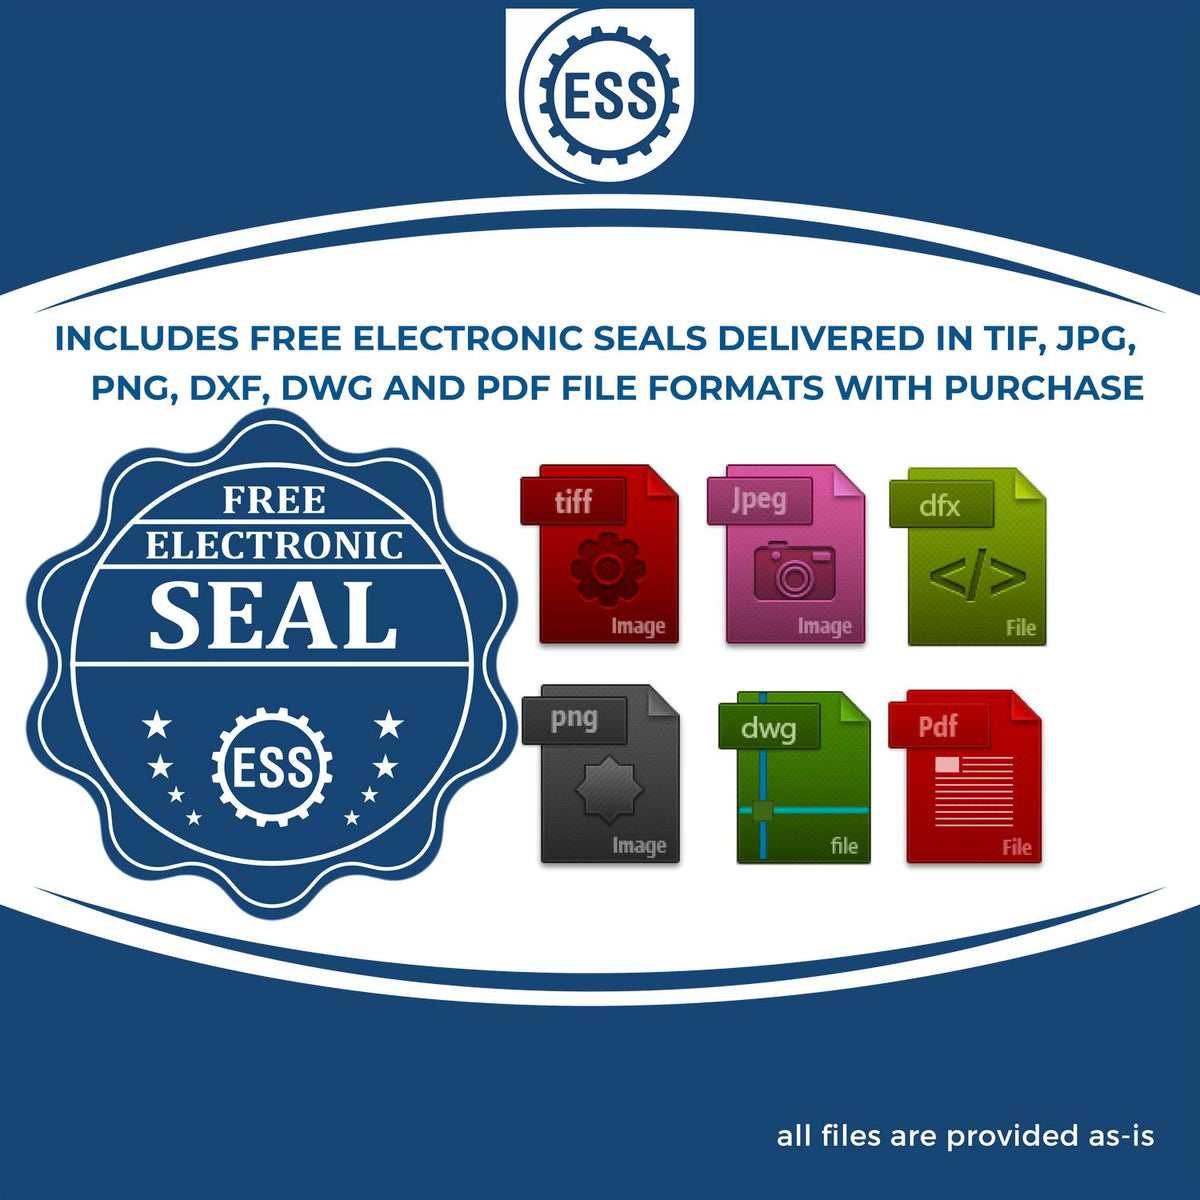 An infographic for the free electronic seal for the Slim Pre-Inked South Carolina Professional Engineer Seal Stamp illustrating the different file type icons such as DXF, DWG, TIF, JPG and PNG.